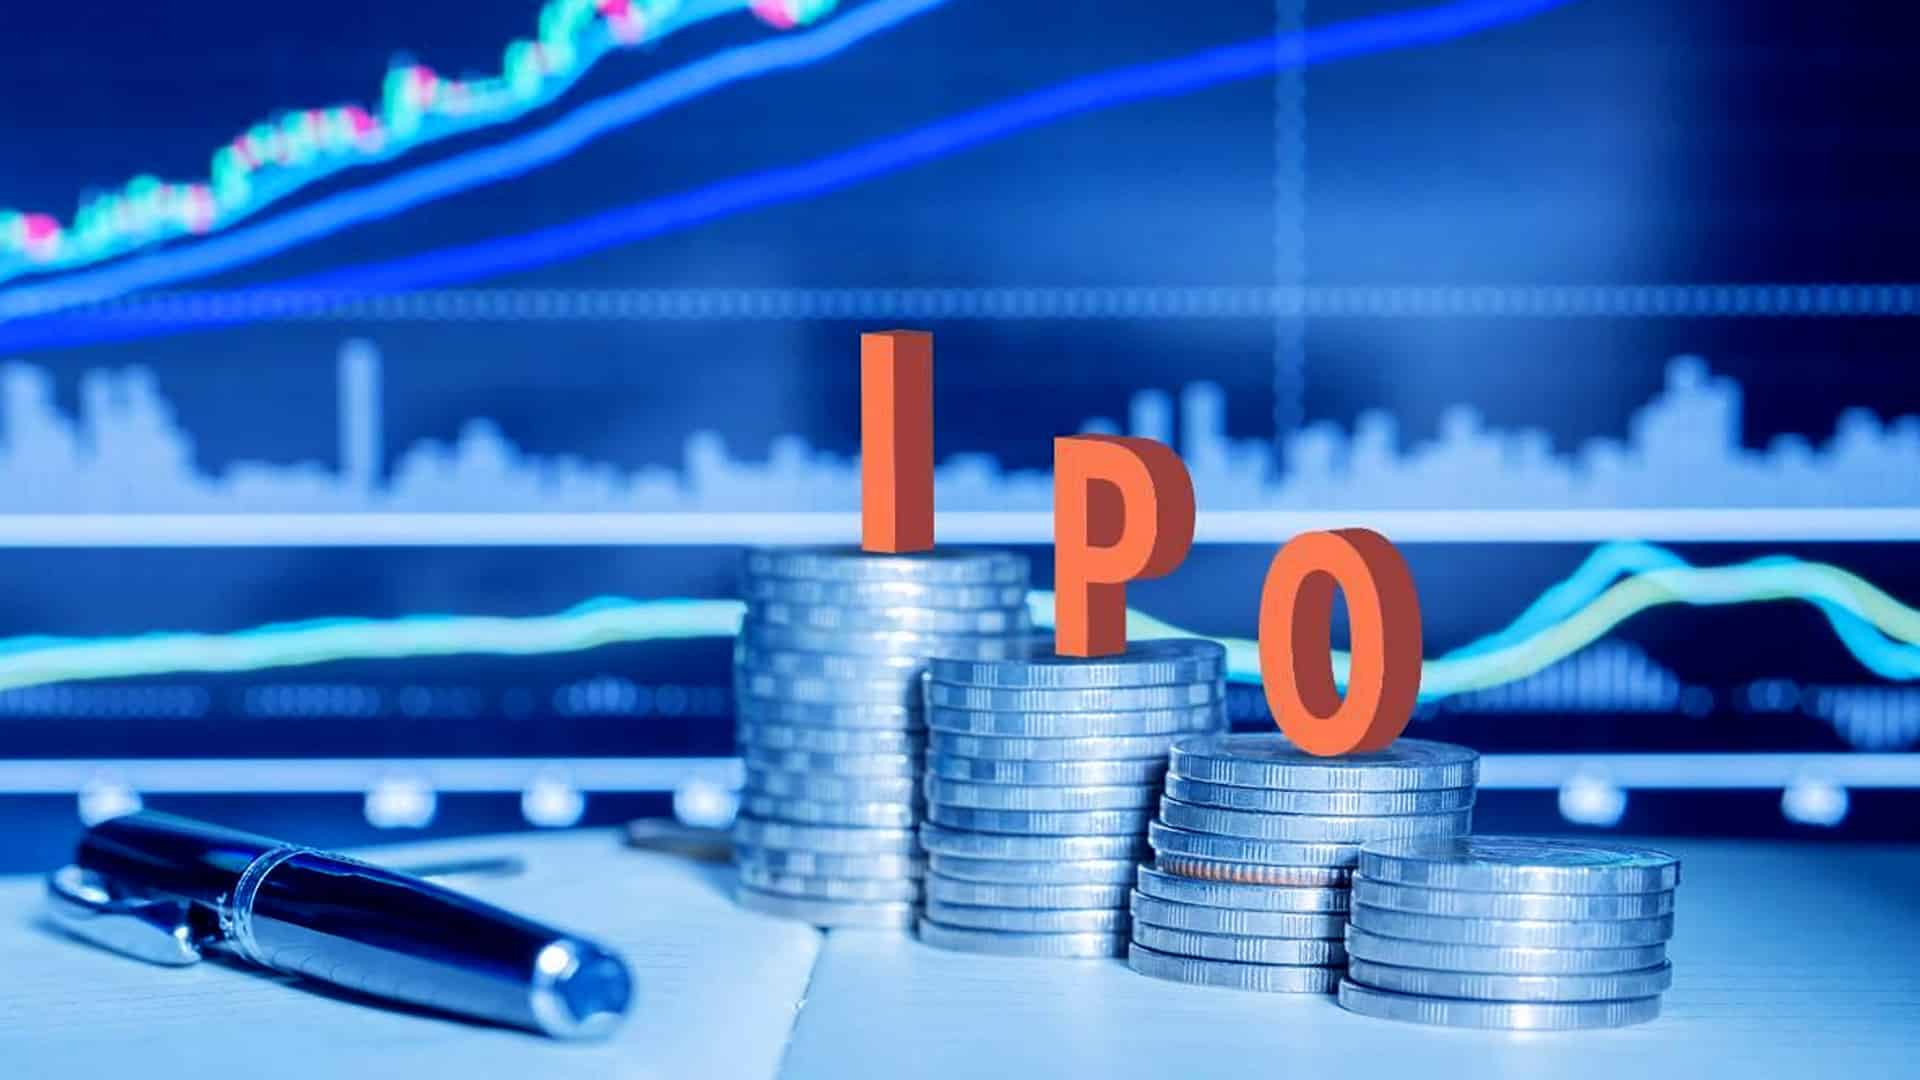 Yatharth Hospital IPO to open on Jul 26; fixes price band at Rs 285-300/share